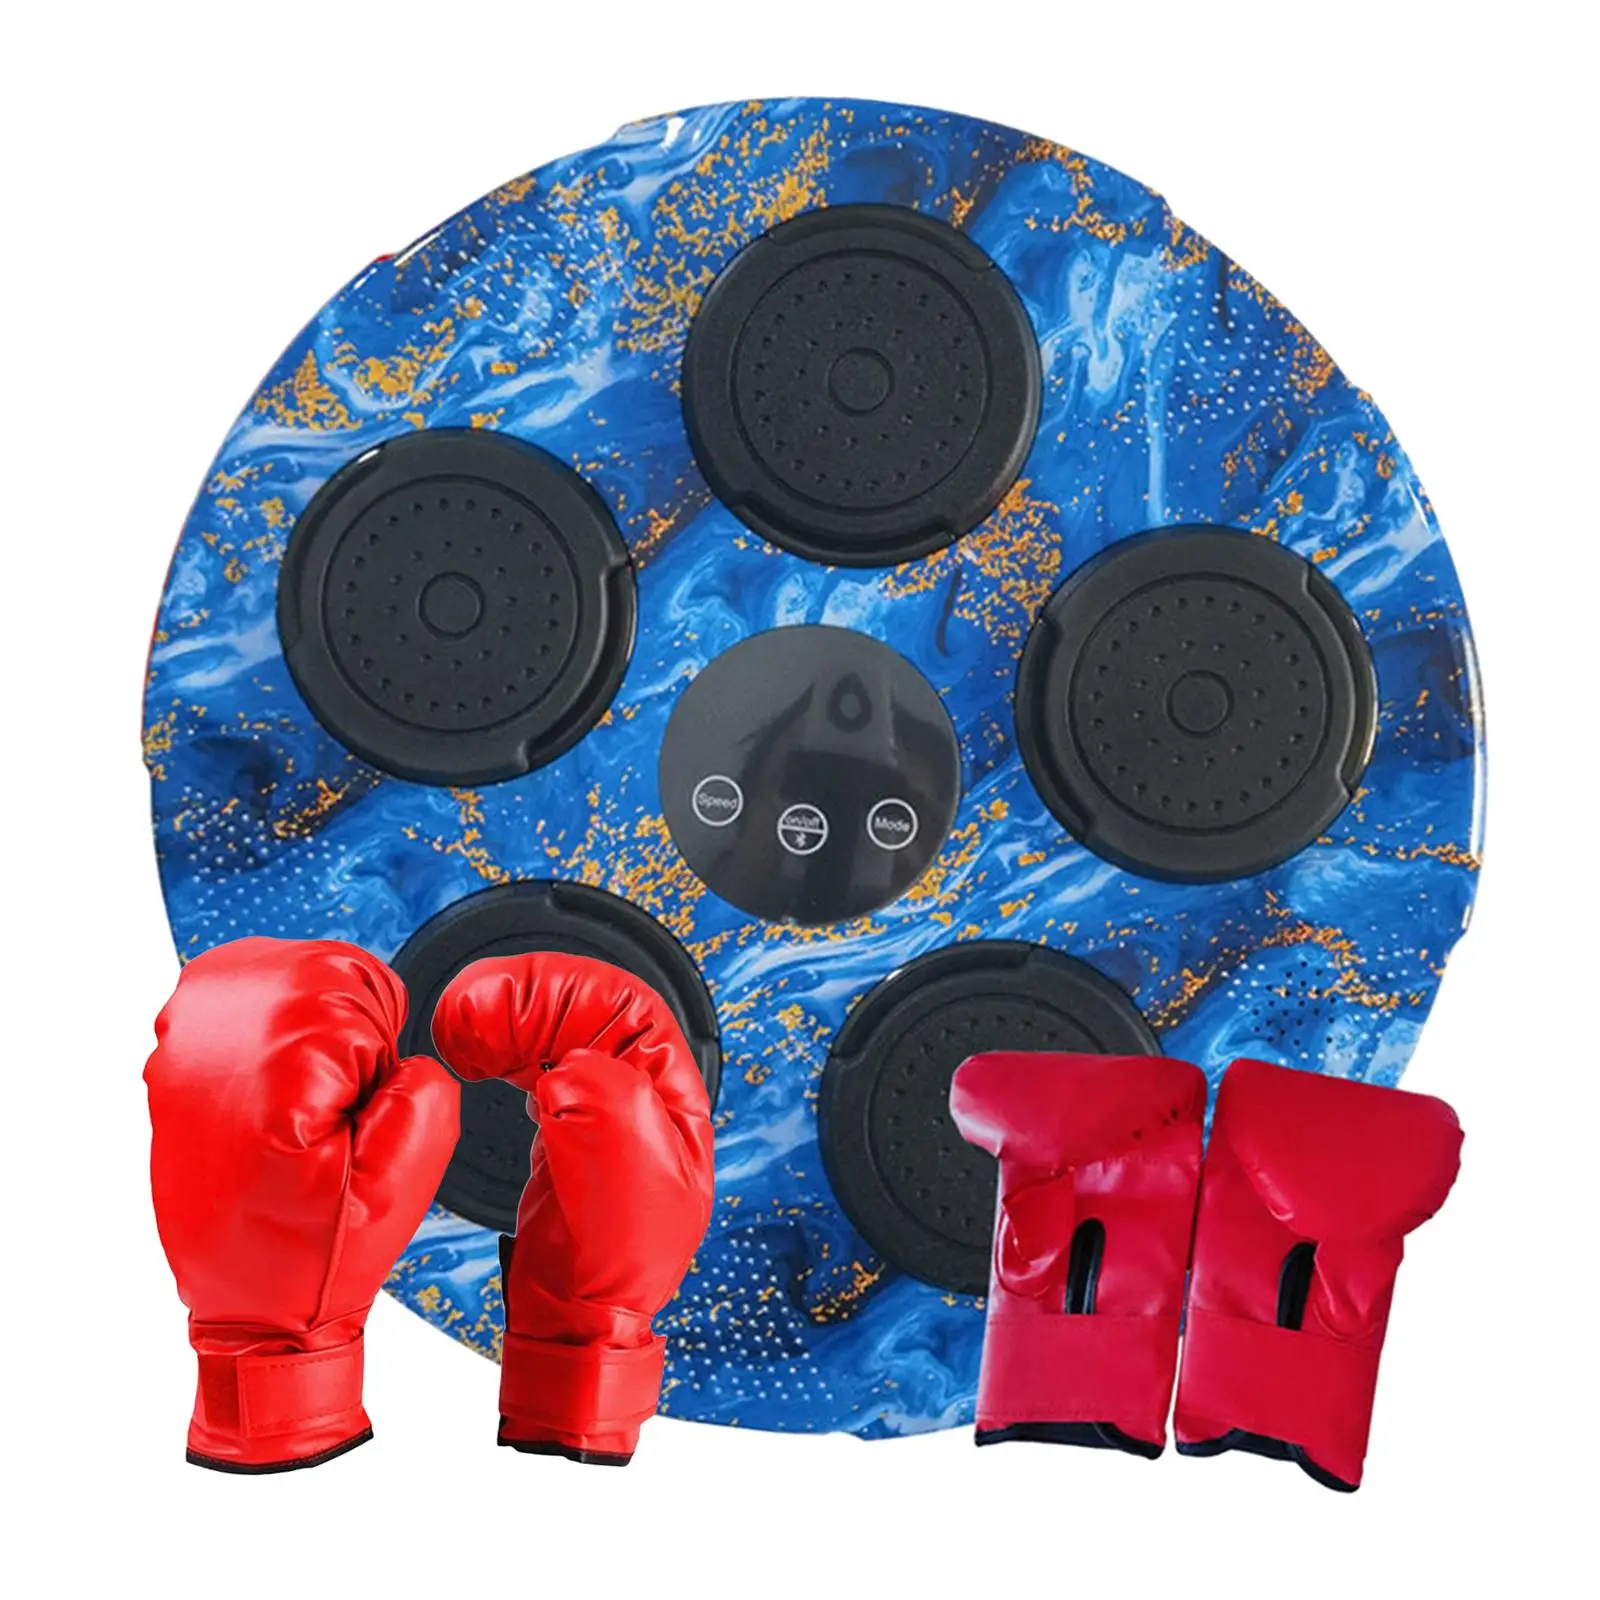 Music Boxing Machine Smart Boxing Trainer Equipment for Practice Home Gym